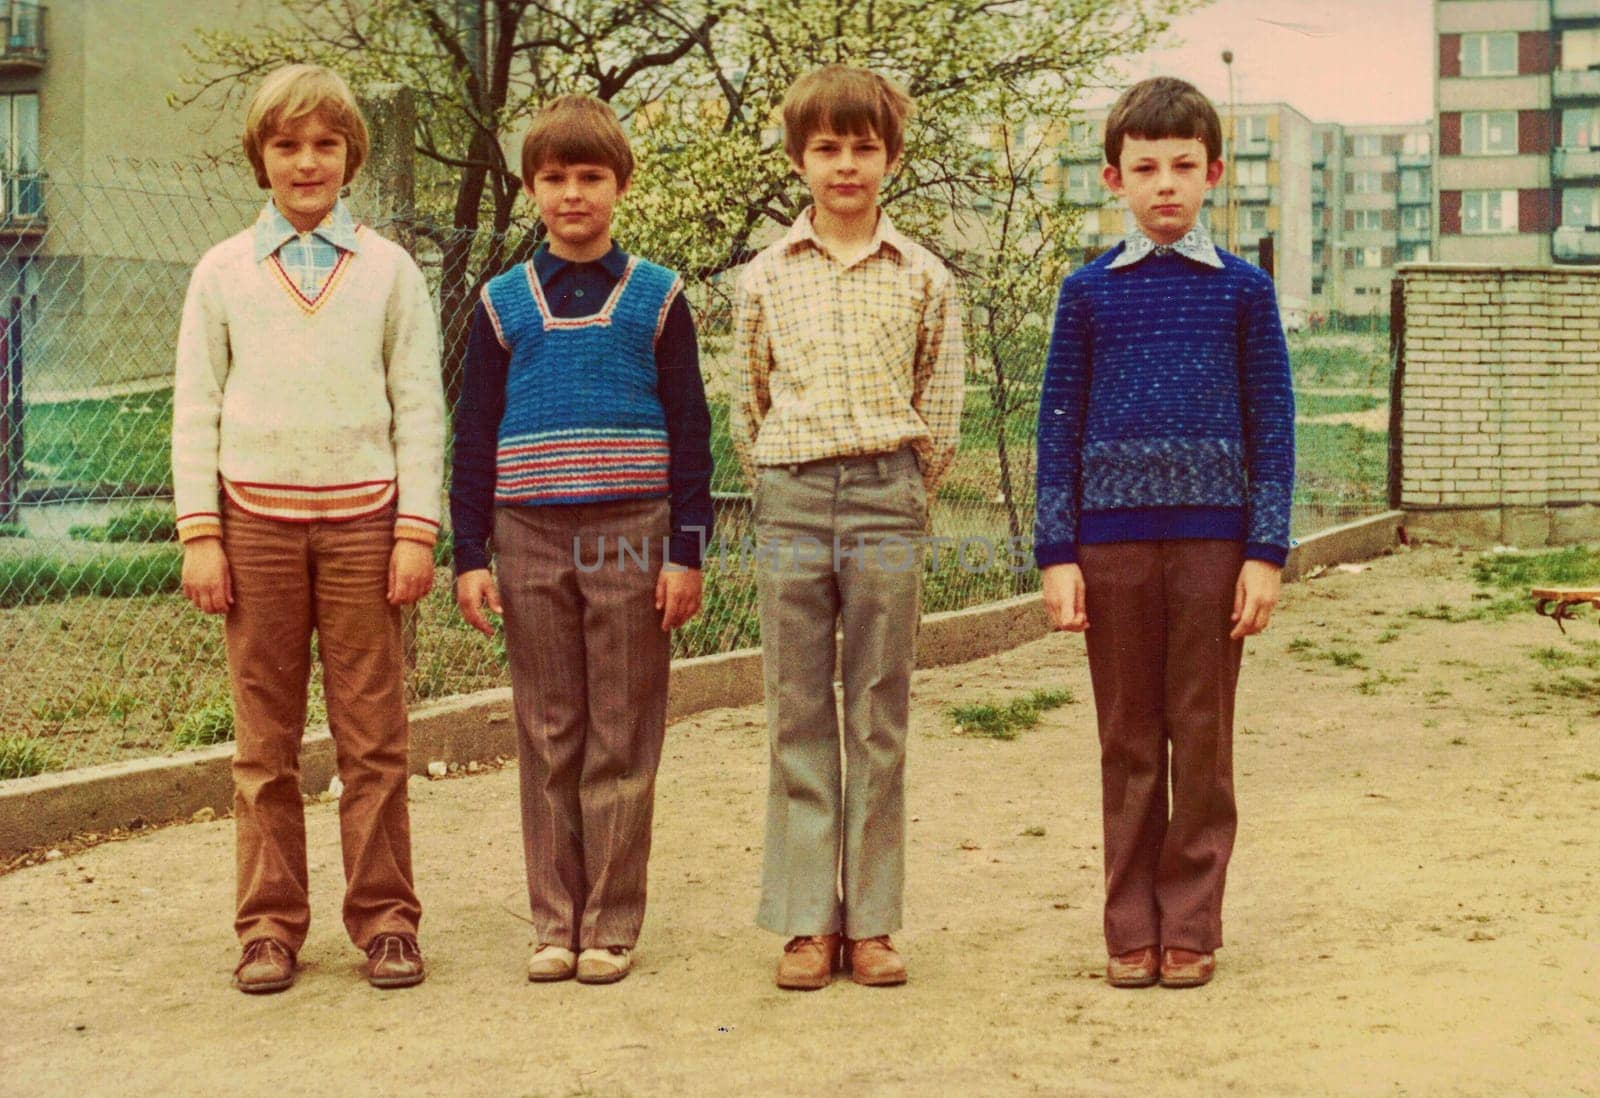 Retro photo shows pupils boys outdoors. They pose for a group photography by roman_nerud